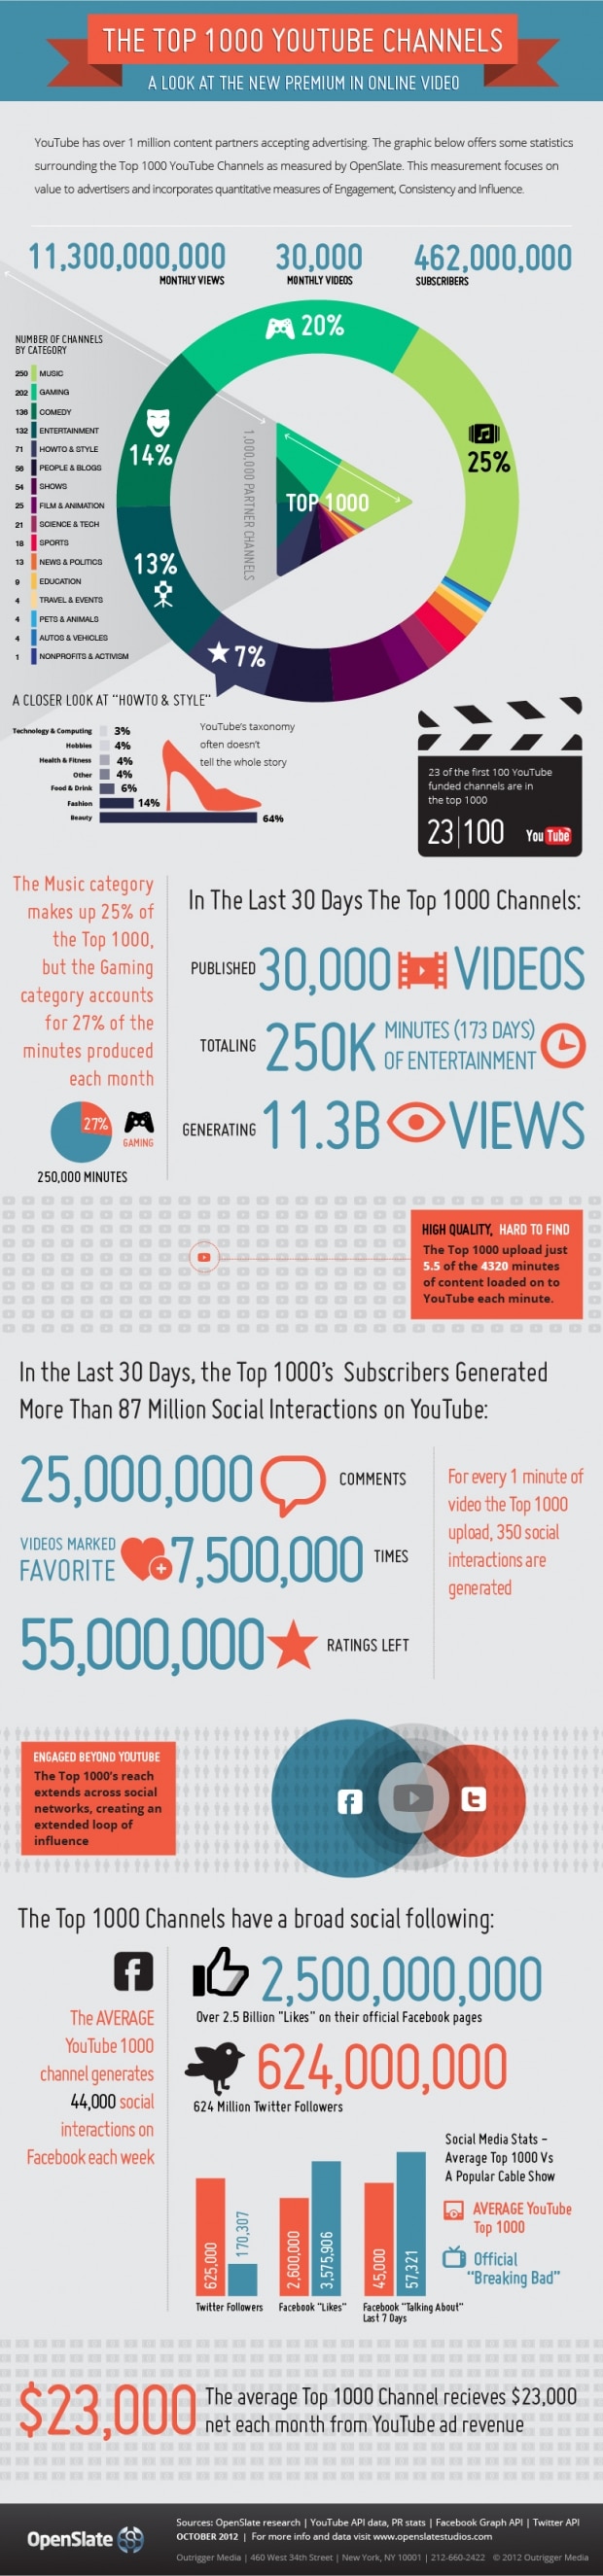 youtube-earnings-top-channels-infographic